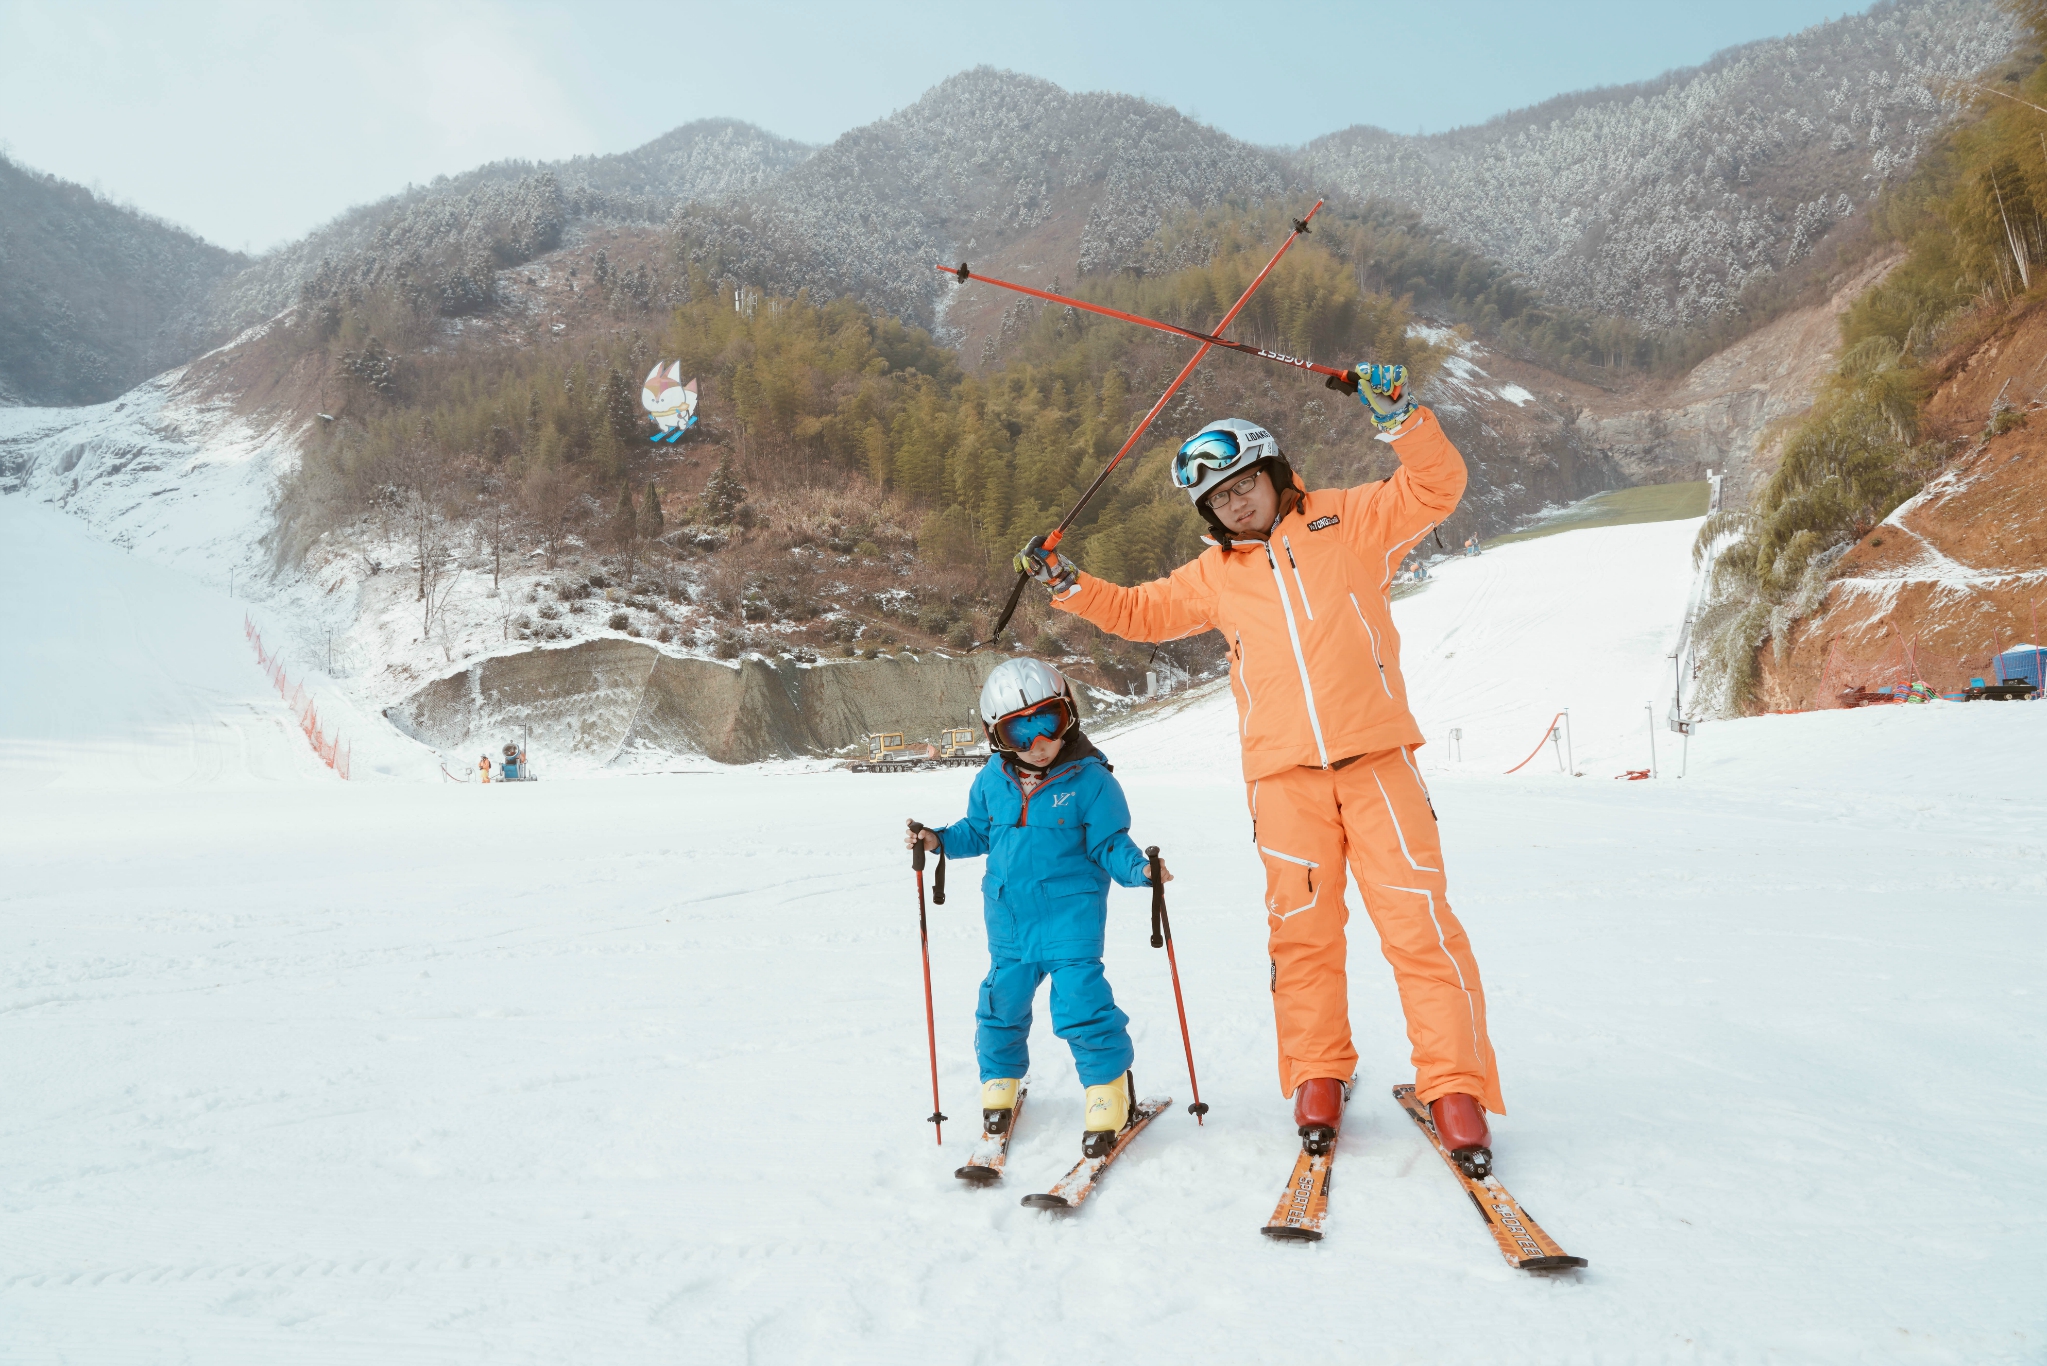 Skiing with young children - The Snow School